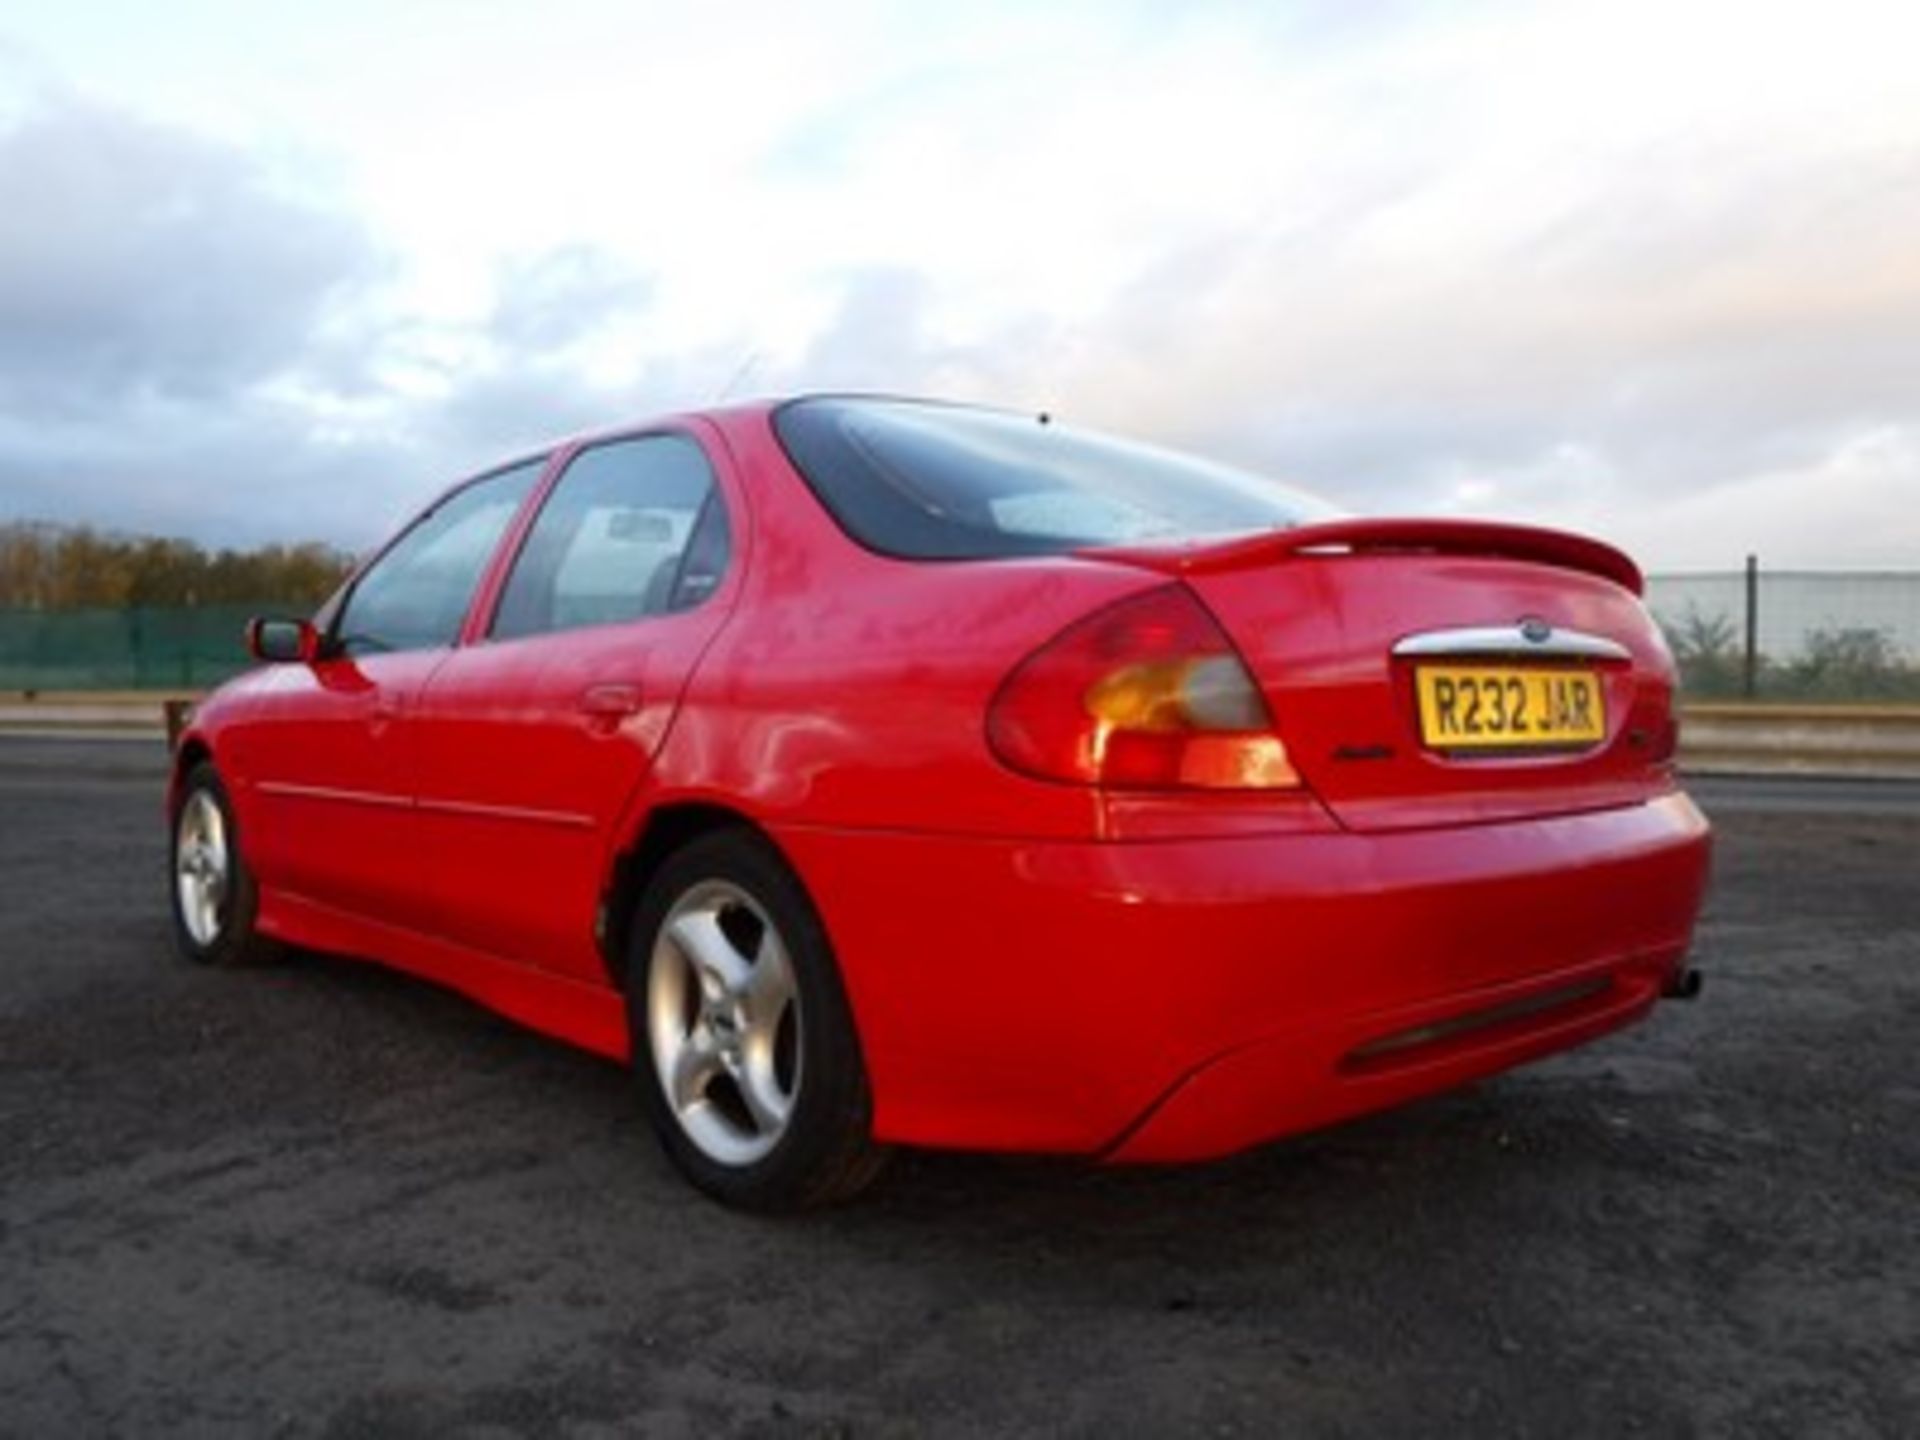 FORD MONDEO ST 24 V6 - 2497cc - Image 4 of 24